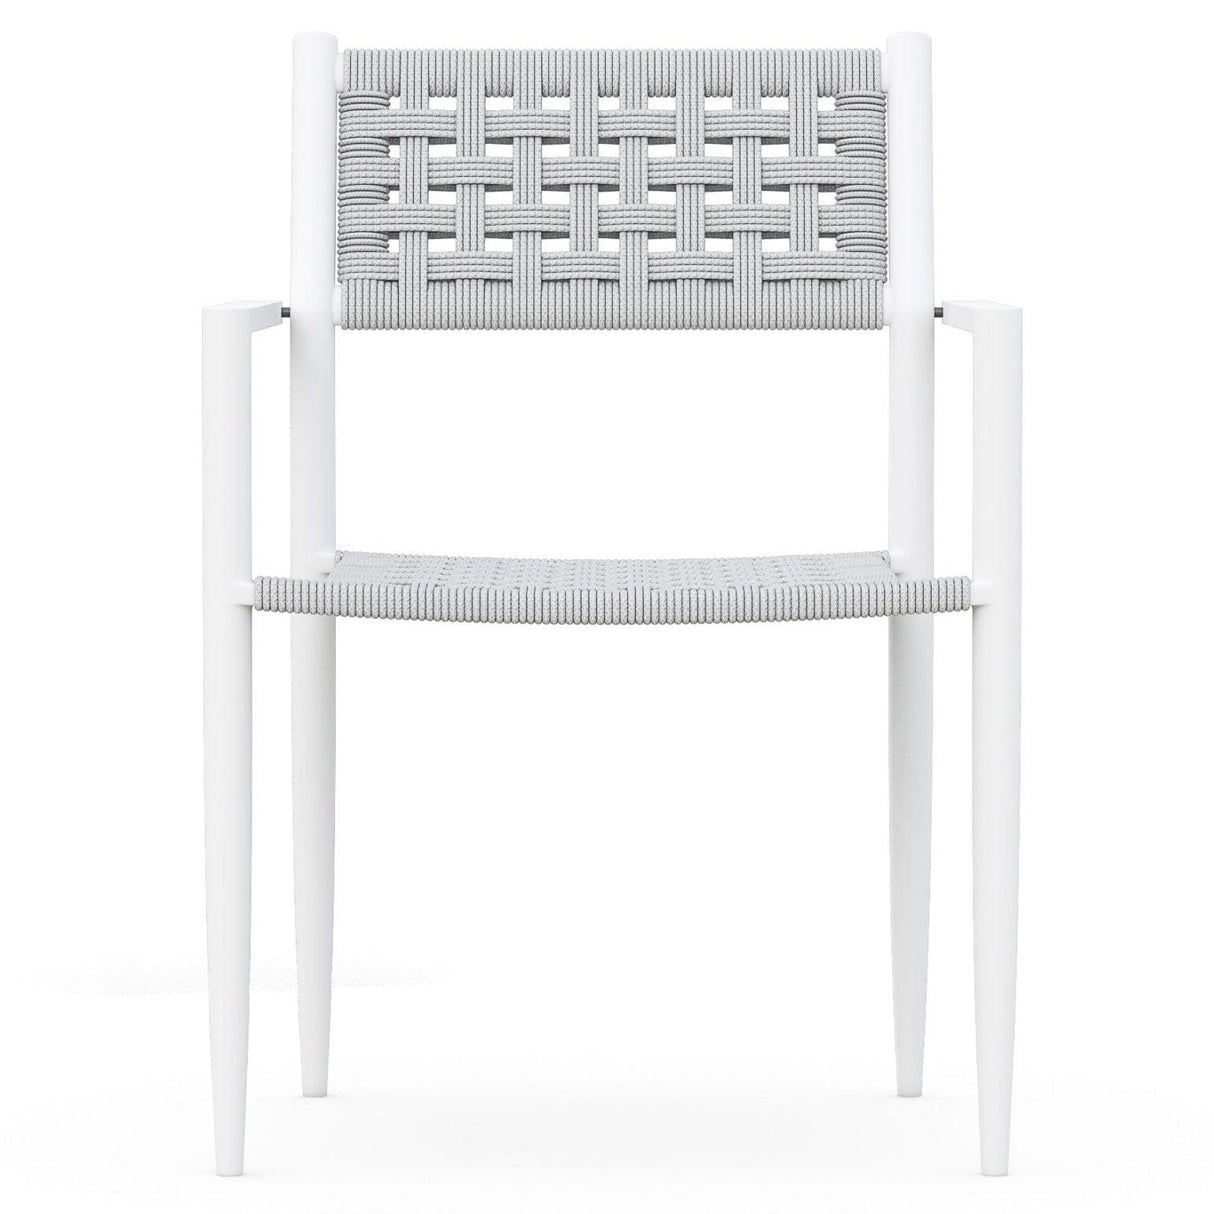 Azzurro Living Naples Dining Chair (Set of 2 or 4) Chairs